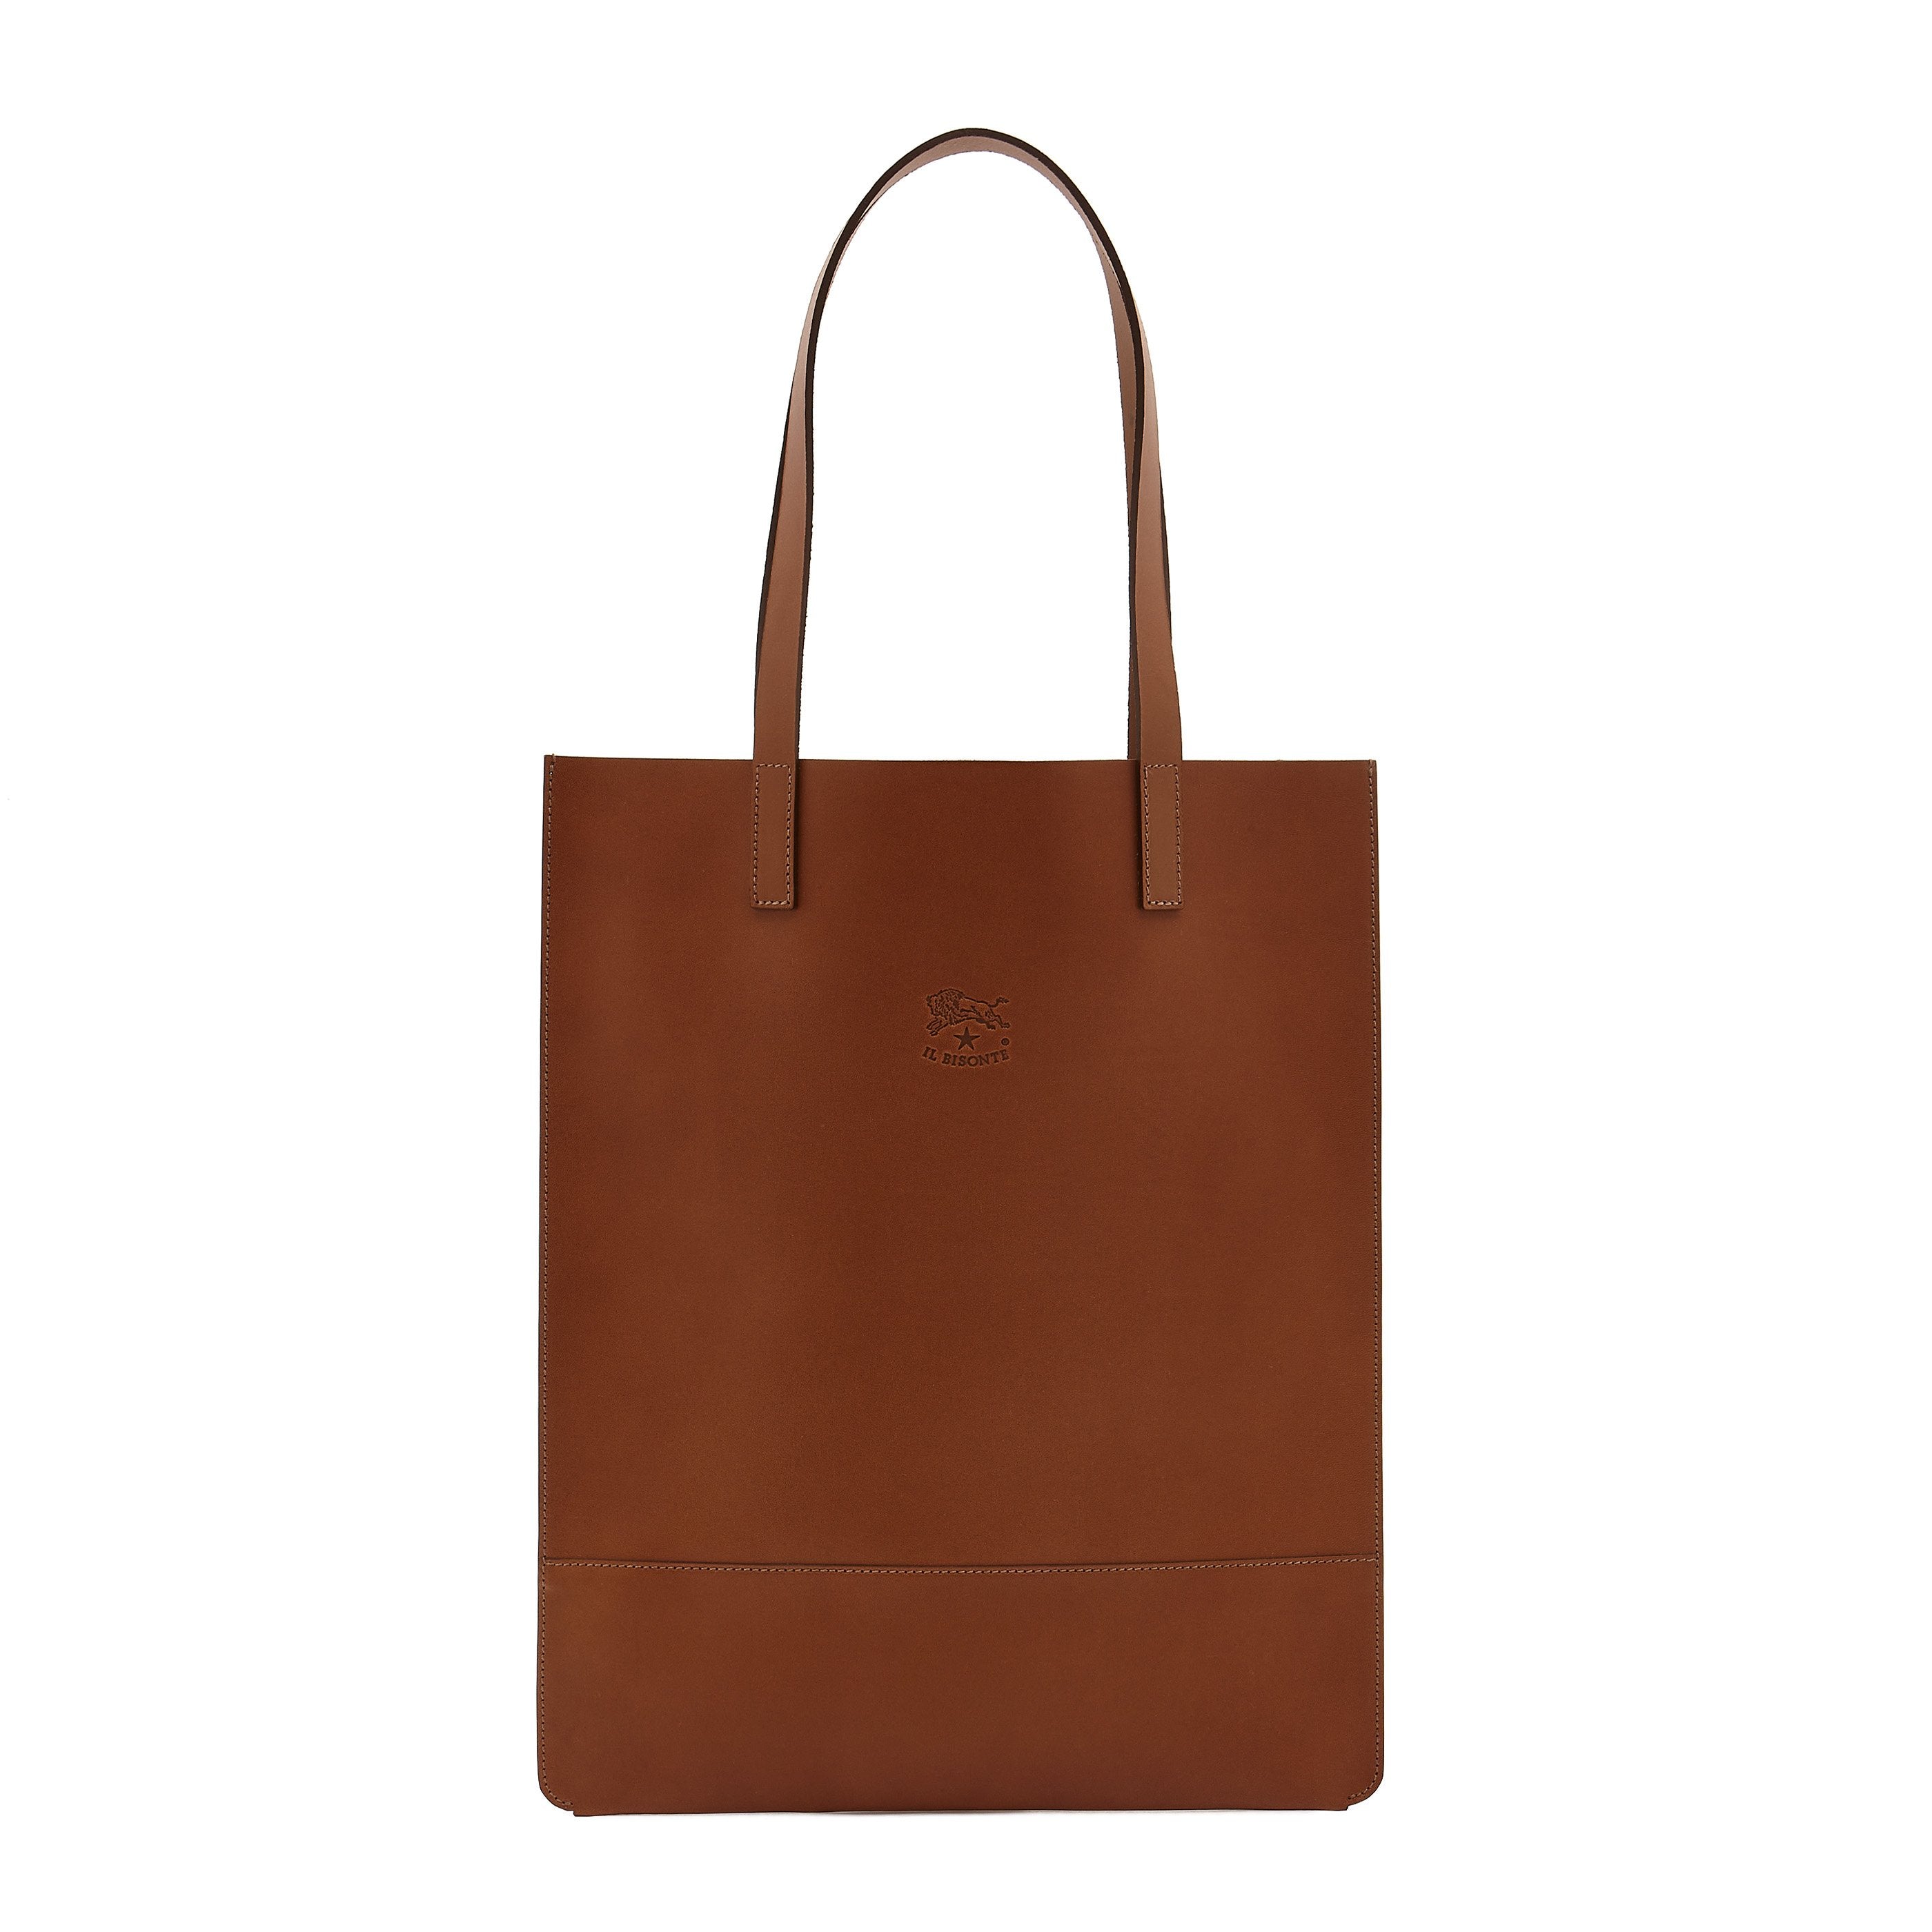 Cassiopea | Women's tote bag in leather color chocolate